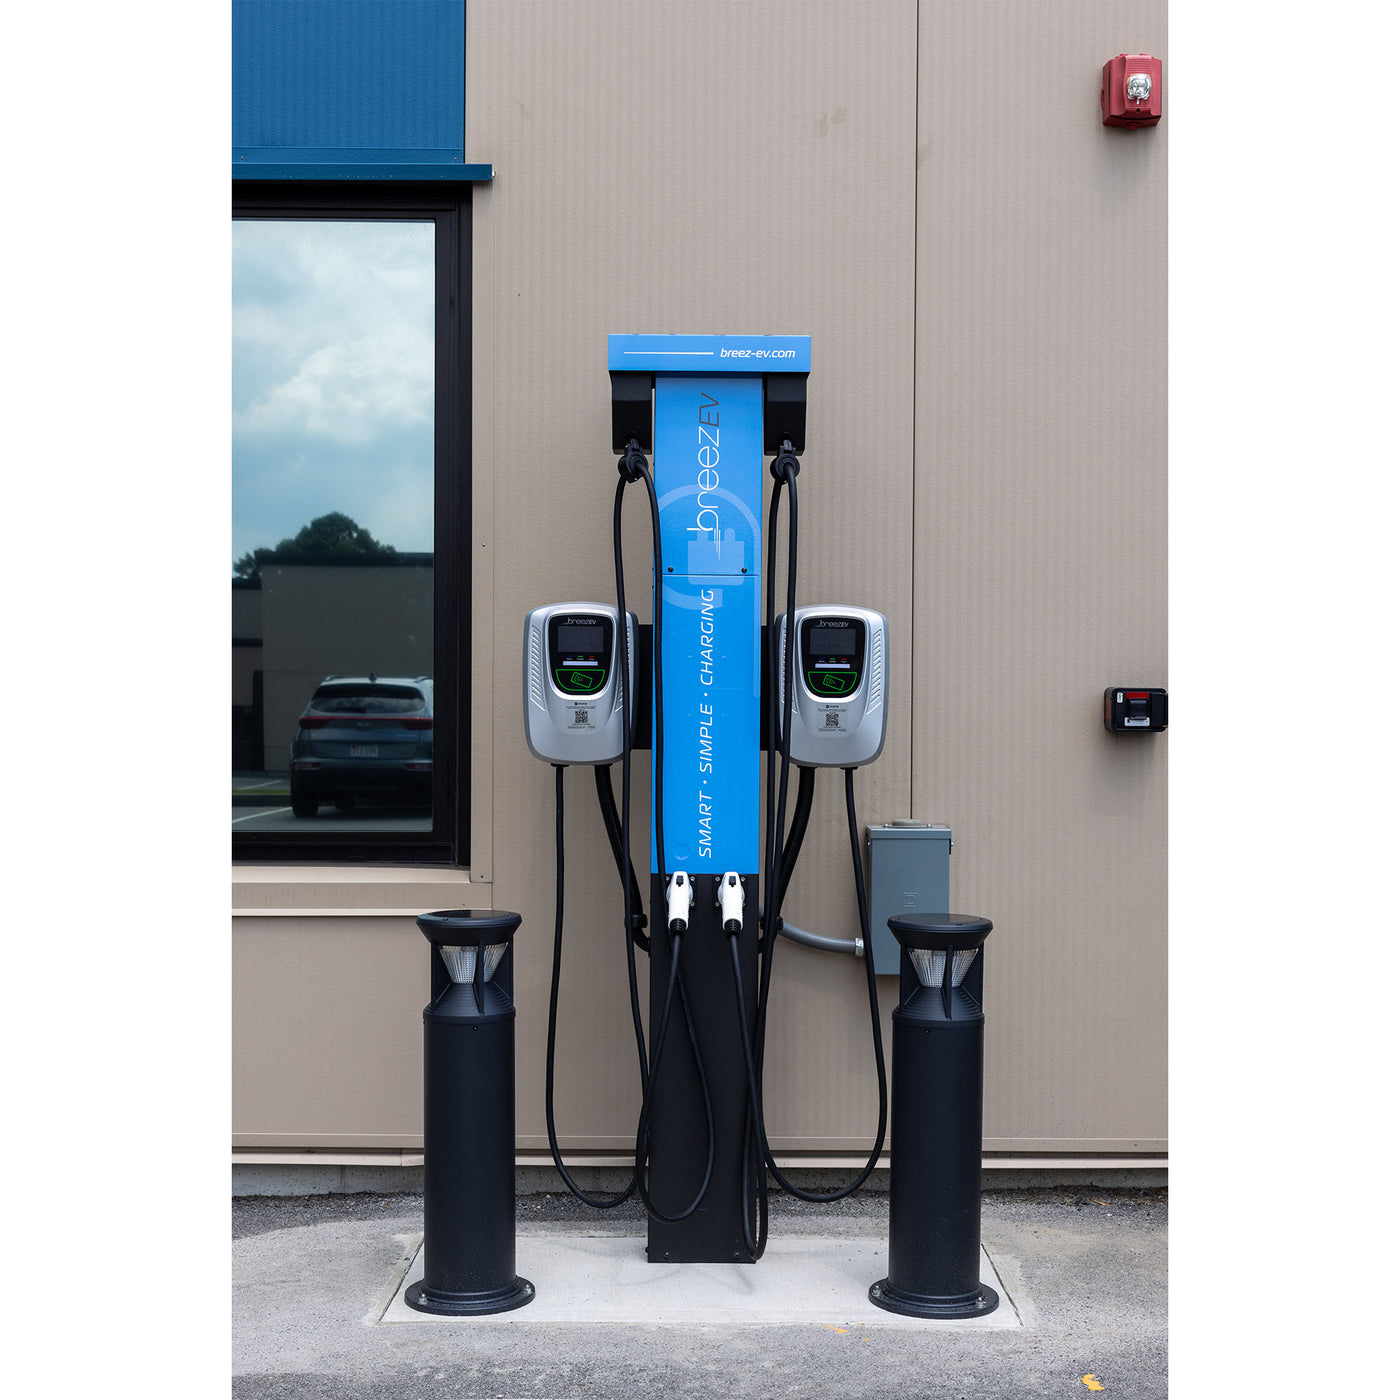 LEVEL 2 ELECTRIC VEHICLE CHARGER, 24-48 Adjustable Amps, 18ft Cable, RFID Compatible